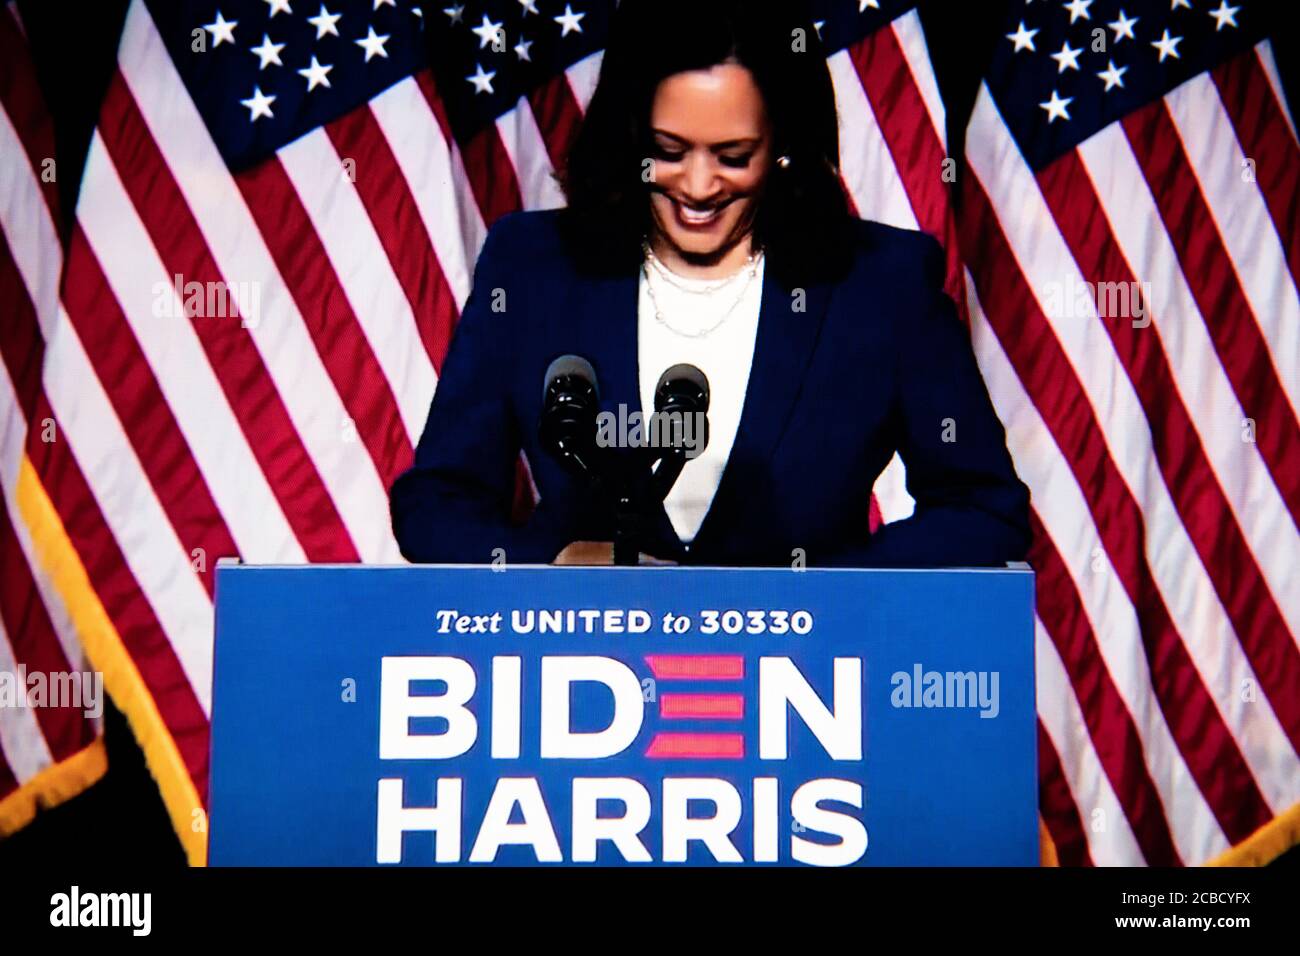 Washington, USA. 12th Aug, 2020. A close-up photo illustration of a laptop computer screen shows Sen. Kamala Harris speaking at a livestream event where presumptive Democratic Nominee for President Joe Biden announced her as his Vice Presidential running mate, in Washington, DC, on August 12, 2020 amid the Coronavirus pandemic. Sen. Harris is the first woman of color running for Vice President on a major party ticket. (Graeme Sloan/Sipa USA) Credit: Sipa USA/Alamy Live News Stock Photo